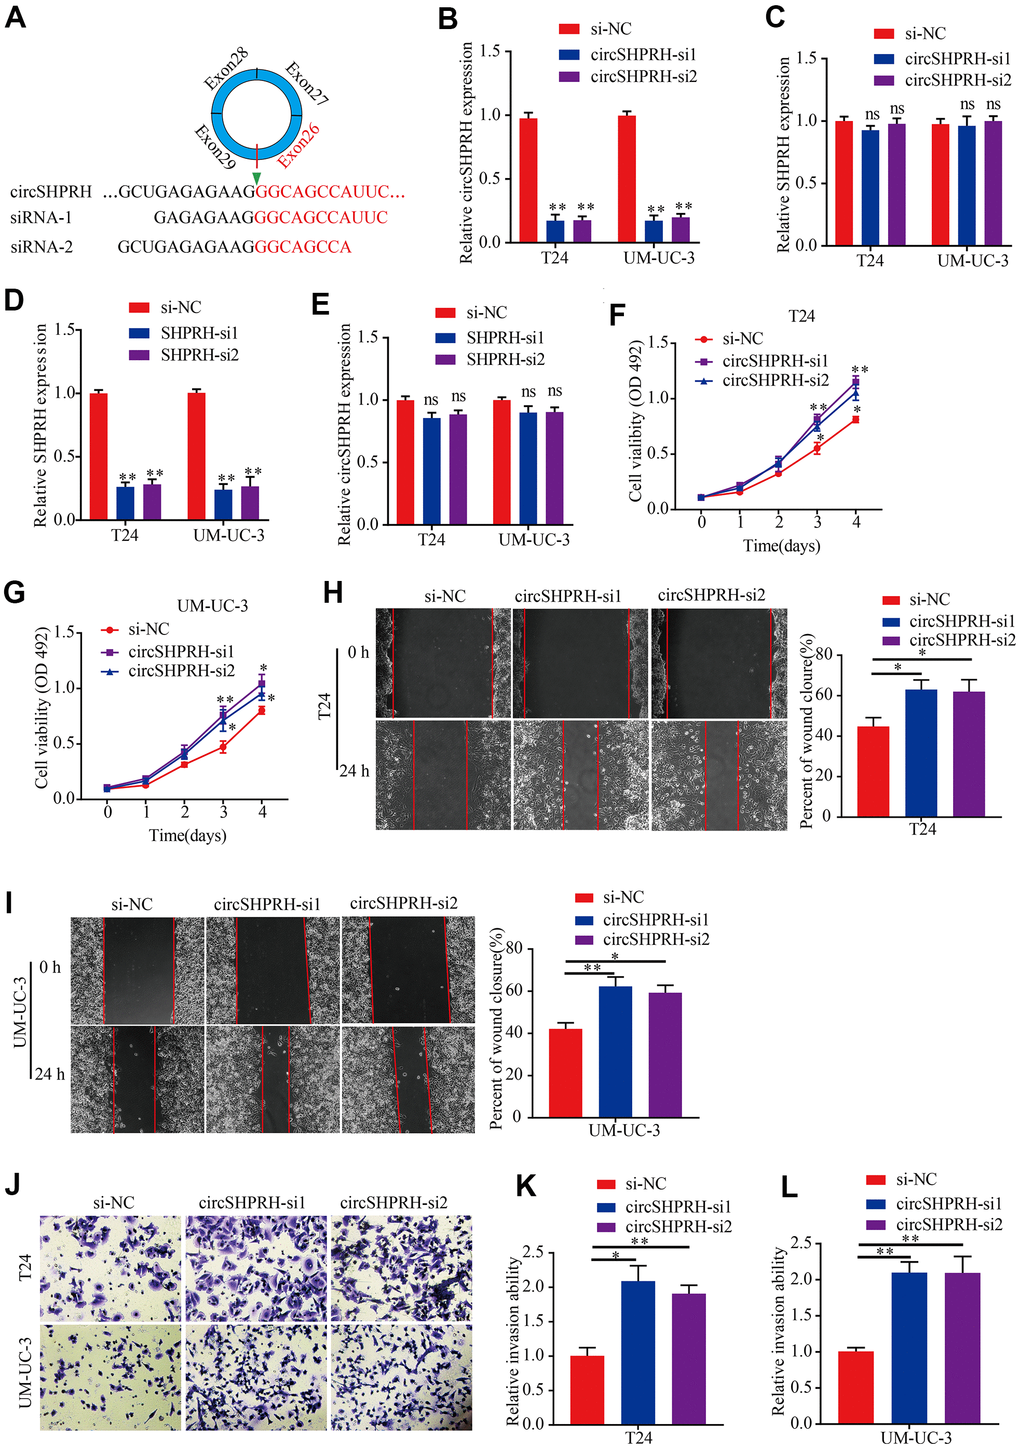 circSHPRH knockdown promotes BCa cell proliferation, migration and invasion. (A) si-circSHPRH was specifically designed to target the back-splice site of circSHPRH. (B, C) The relative expression of circSHPRH and SHPRH in T24 and UM-UC-3 cells transfected with si-NC or si-circSHPRH. (D, E) The relative expression of SHPRH and circSHPRH in T24 and UM-UC-3 cells transfected with si-NC or si-SHPRH. (F, G) circSHPRH knockdown enhanced cell viability in T24 and UM-UC-3 cells, as shown by the MTS assay. (H, I) circSHPRH knockdown promoted the migration ability of T24 and UM-UC-3 cells, as measured by wound healing assay. (J–L) circSHPRH knockdown promoted the invasion ability of T24 and UM-UC-3 cells, as detected by Transwell invasion assay. Magnification, 200×, *PP